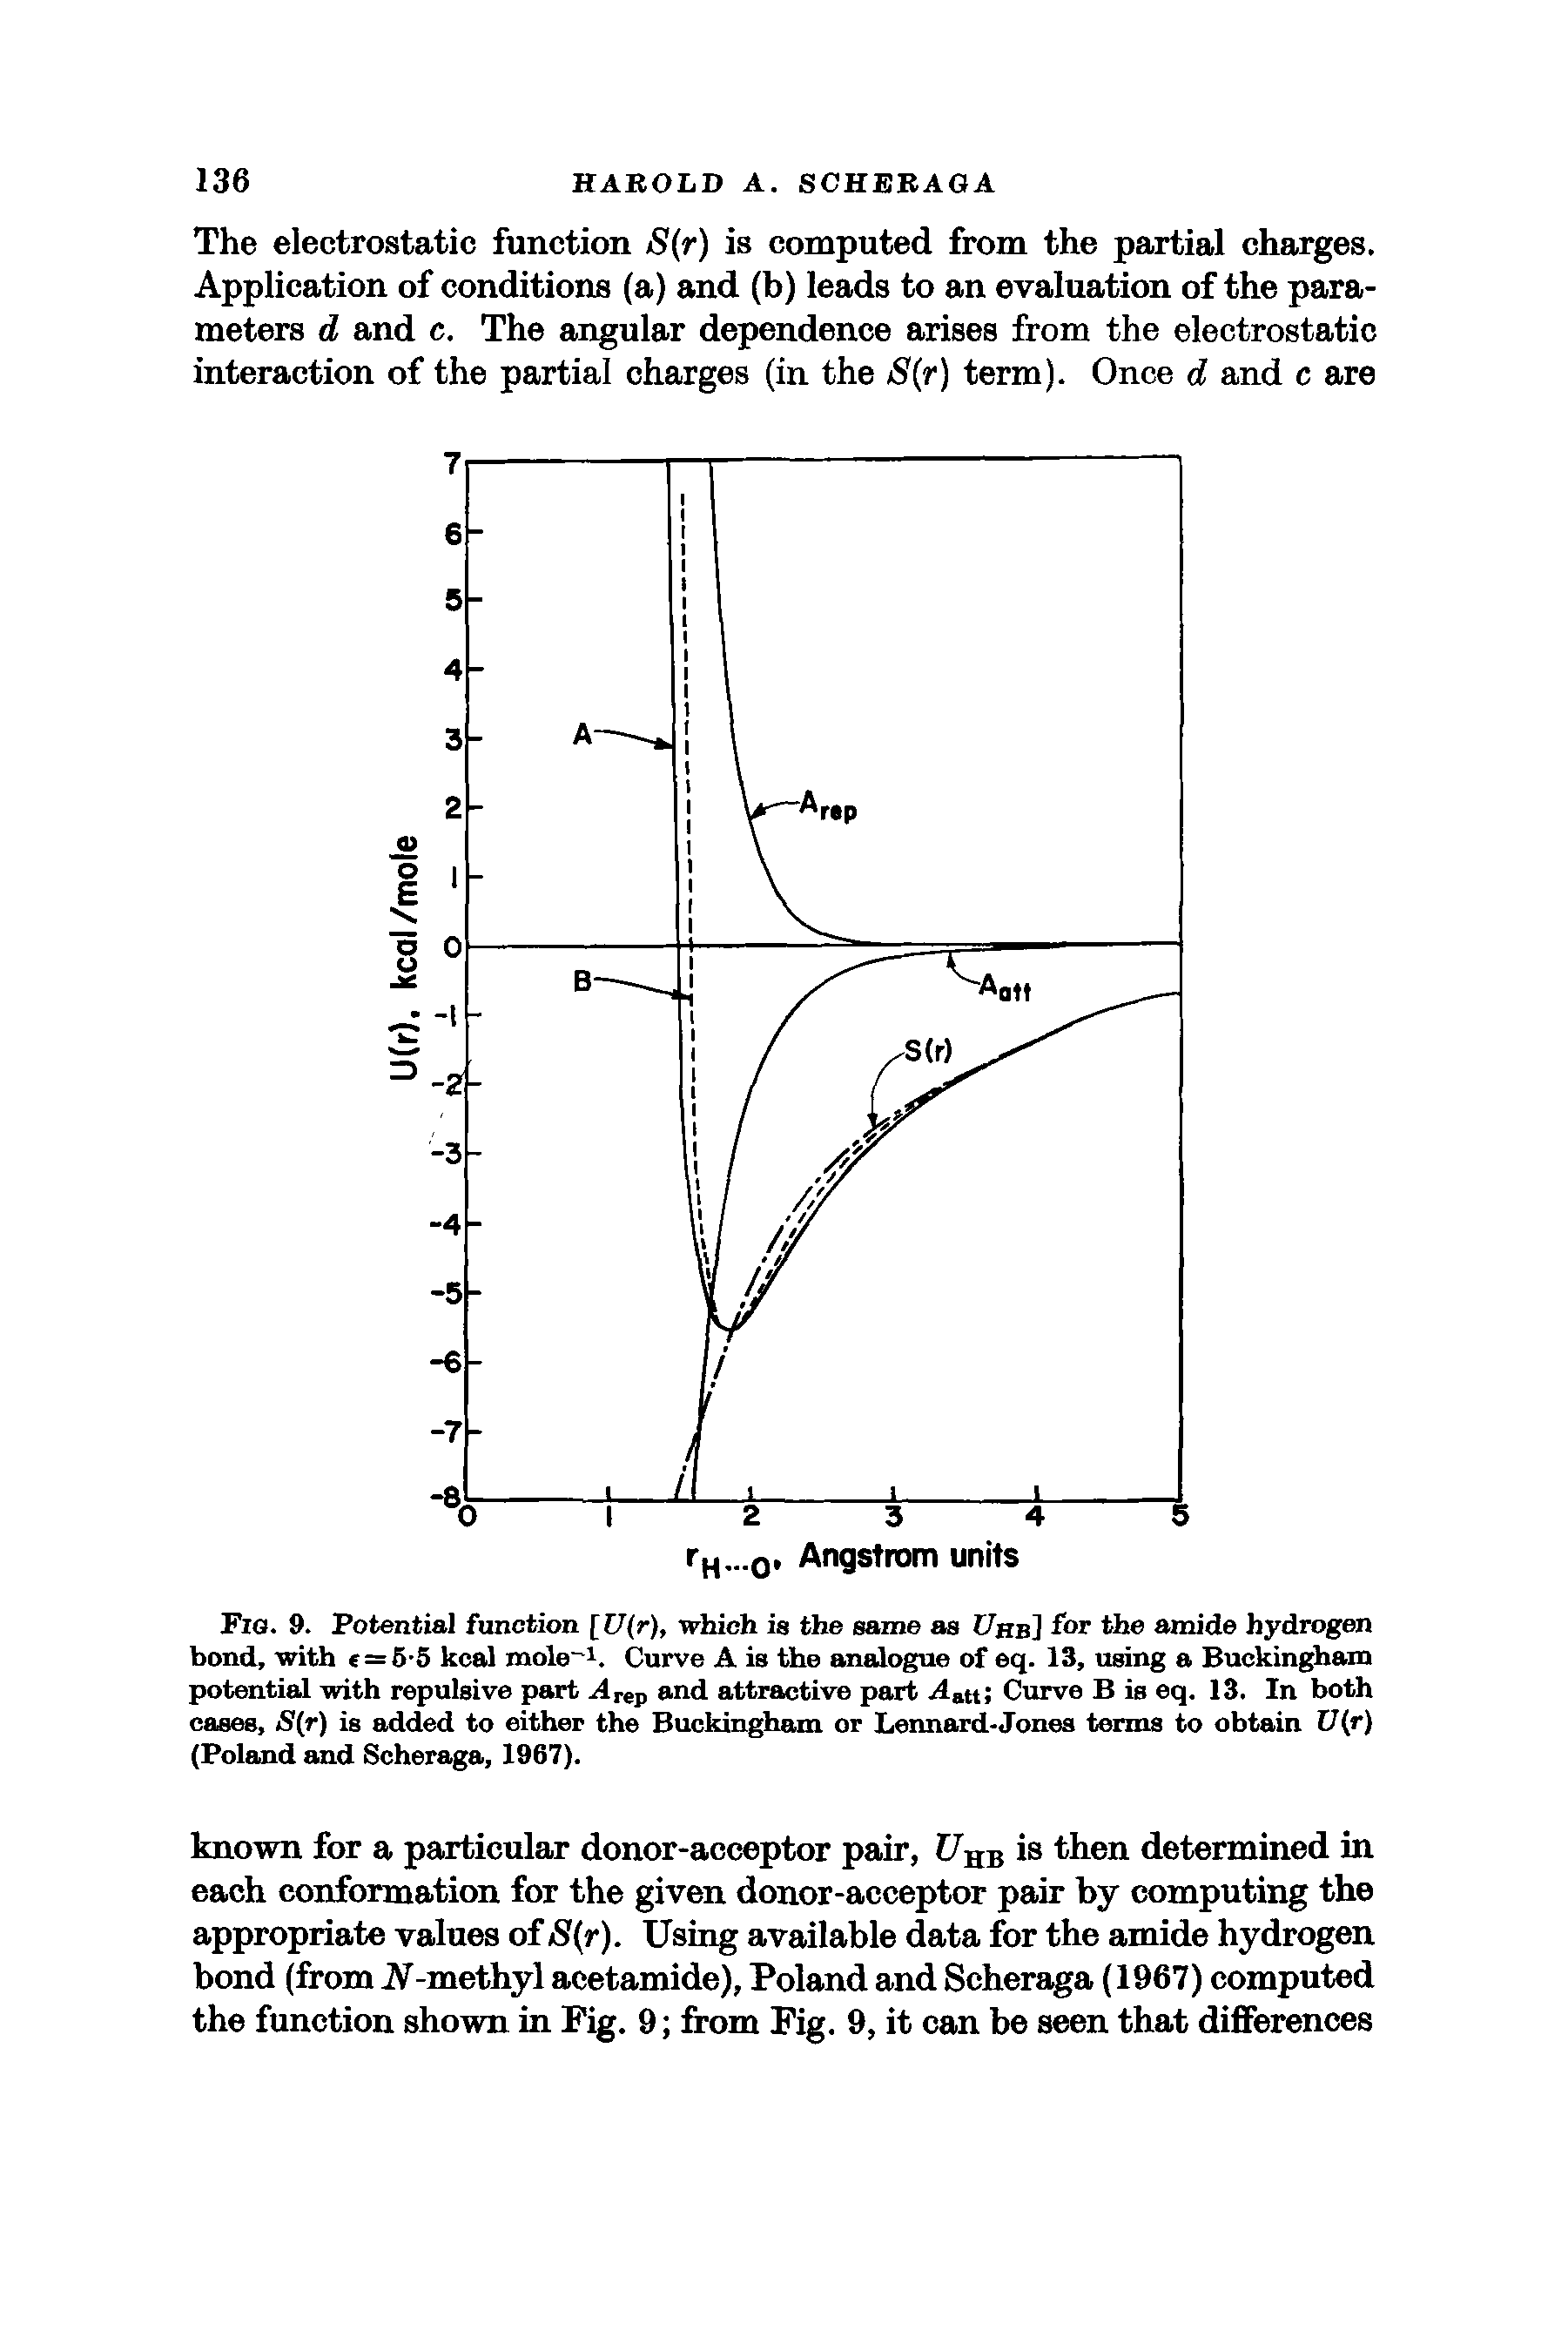 Fig. 9. Potential function [U(r), which is the same as Ubb] for the amide hydrogen bond, with e = 5-5 kcal mole"1. Curve A is the analogue of eq. 13, using a Buckingham potential with repulsive part Arep and attractive part Aatt Curve B is eq. 13. In both cases, S(r) is added to either the Buckingham or Lennard-Jones terms to obtain U(r) (Poland and Scheraga, 1967).